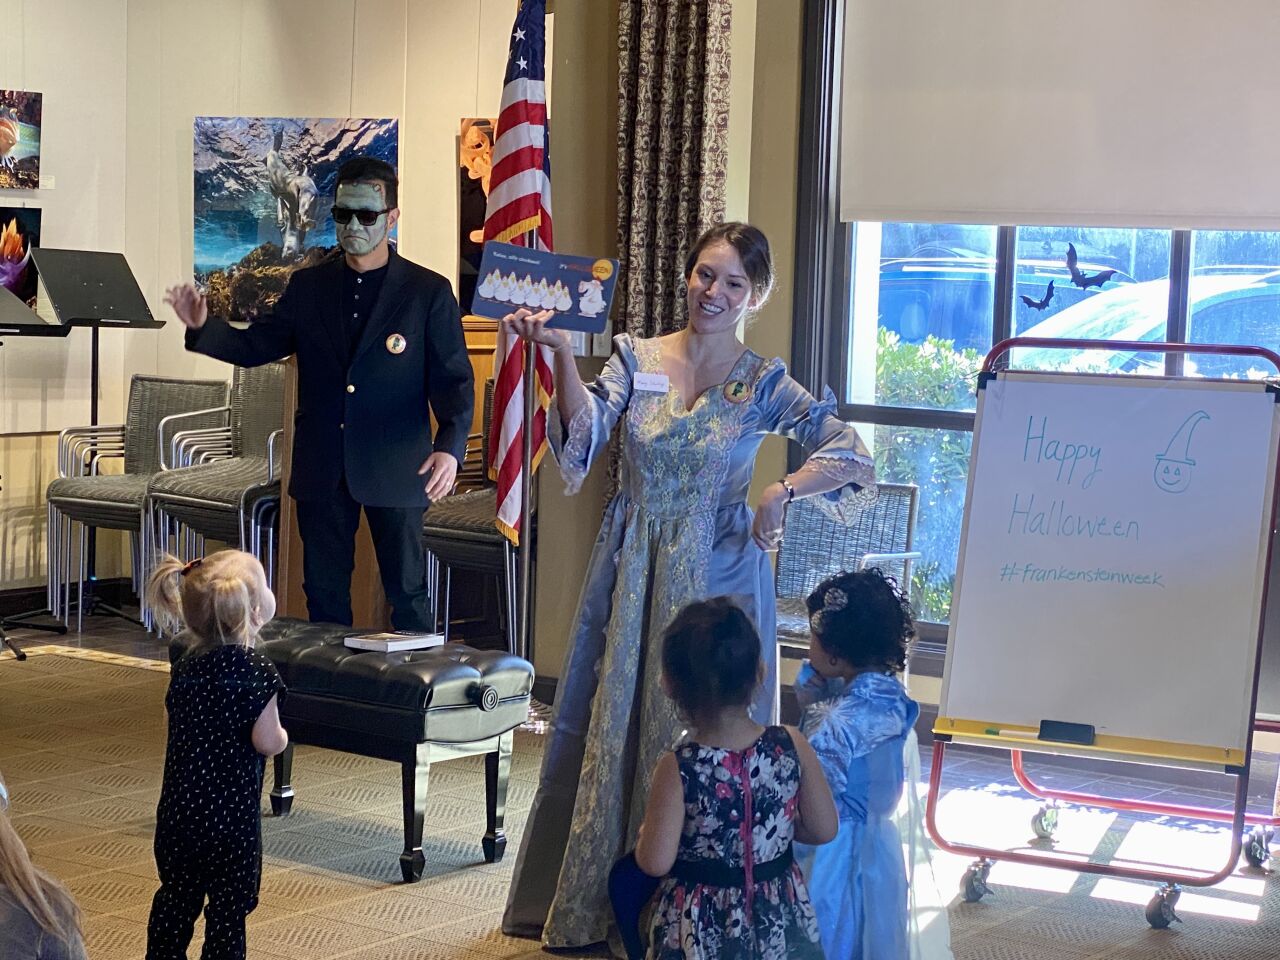 Youth services librarian Katia Graham, as Mary Shelley, leads a Halloween story time with library assistant Dennis Abad as Frankenstein's monster on Oct. 28 at the La Jolla/Riford Library.